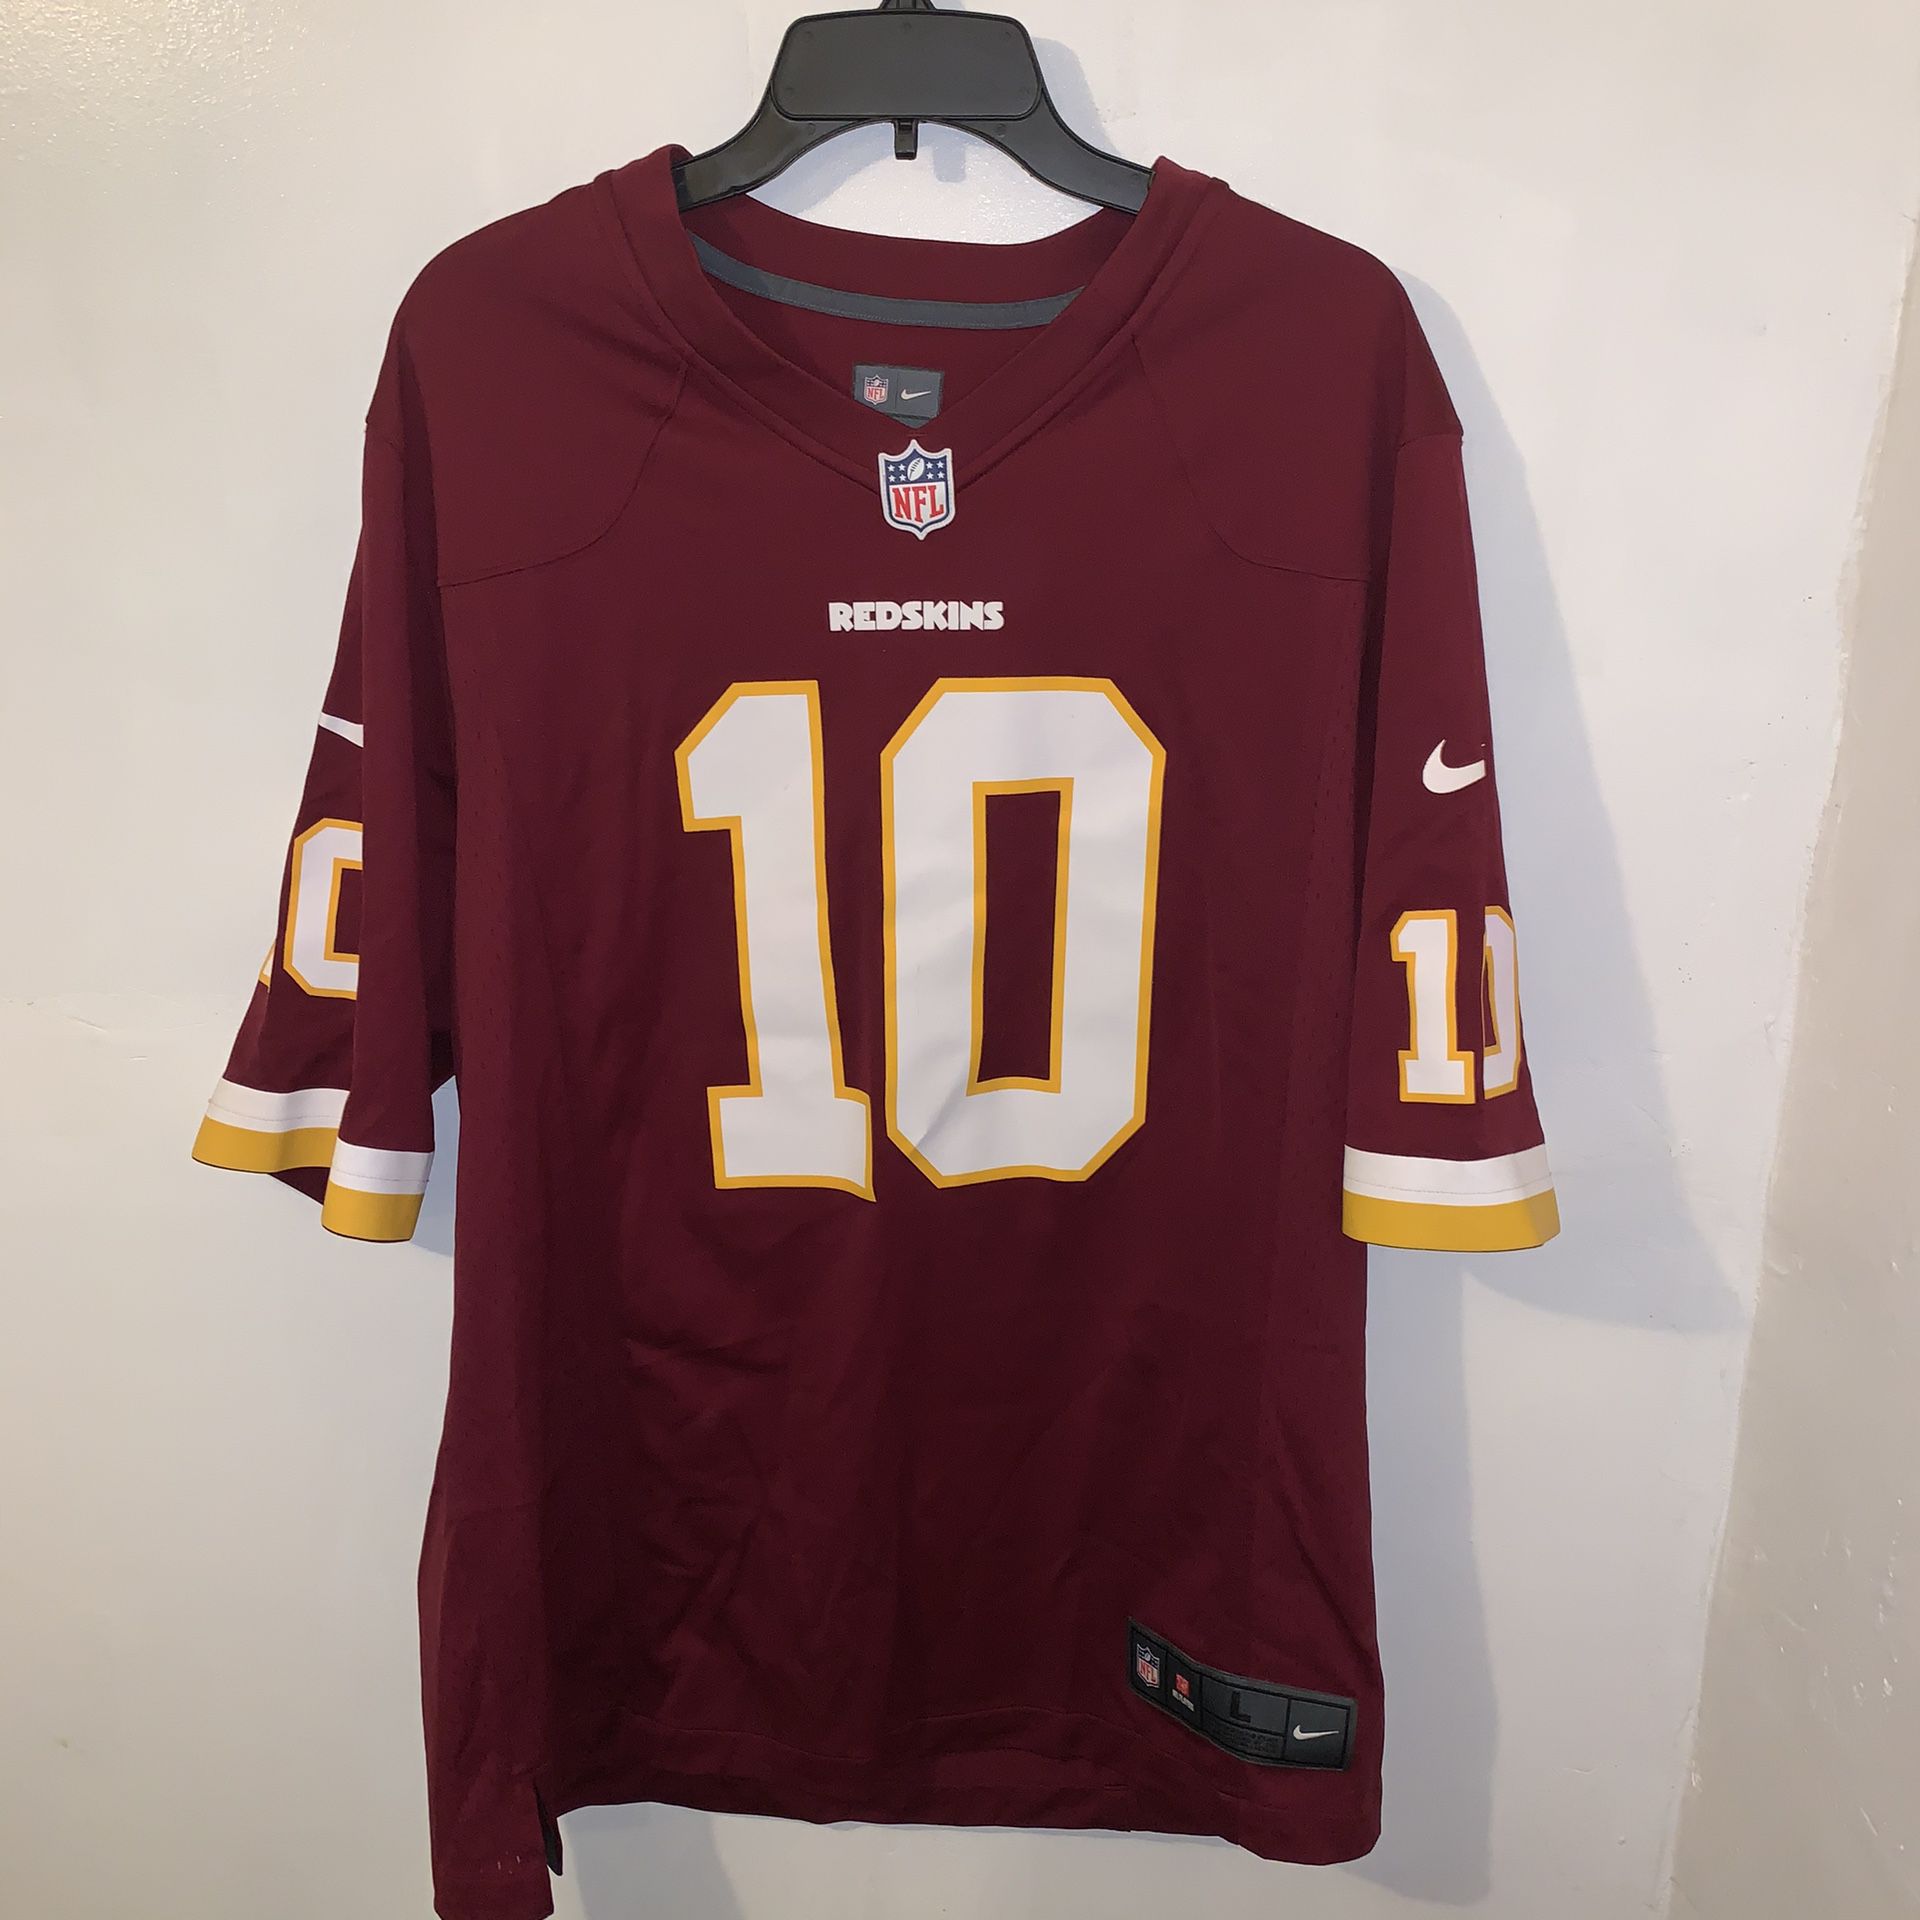 Washington Redskins NFL Football Team Jersey Men’s Size Large Quarterback Robert Griffin III the Third Player Number 10 On Field Nike Brand